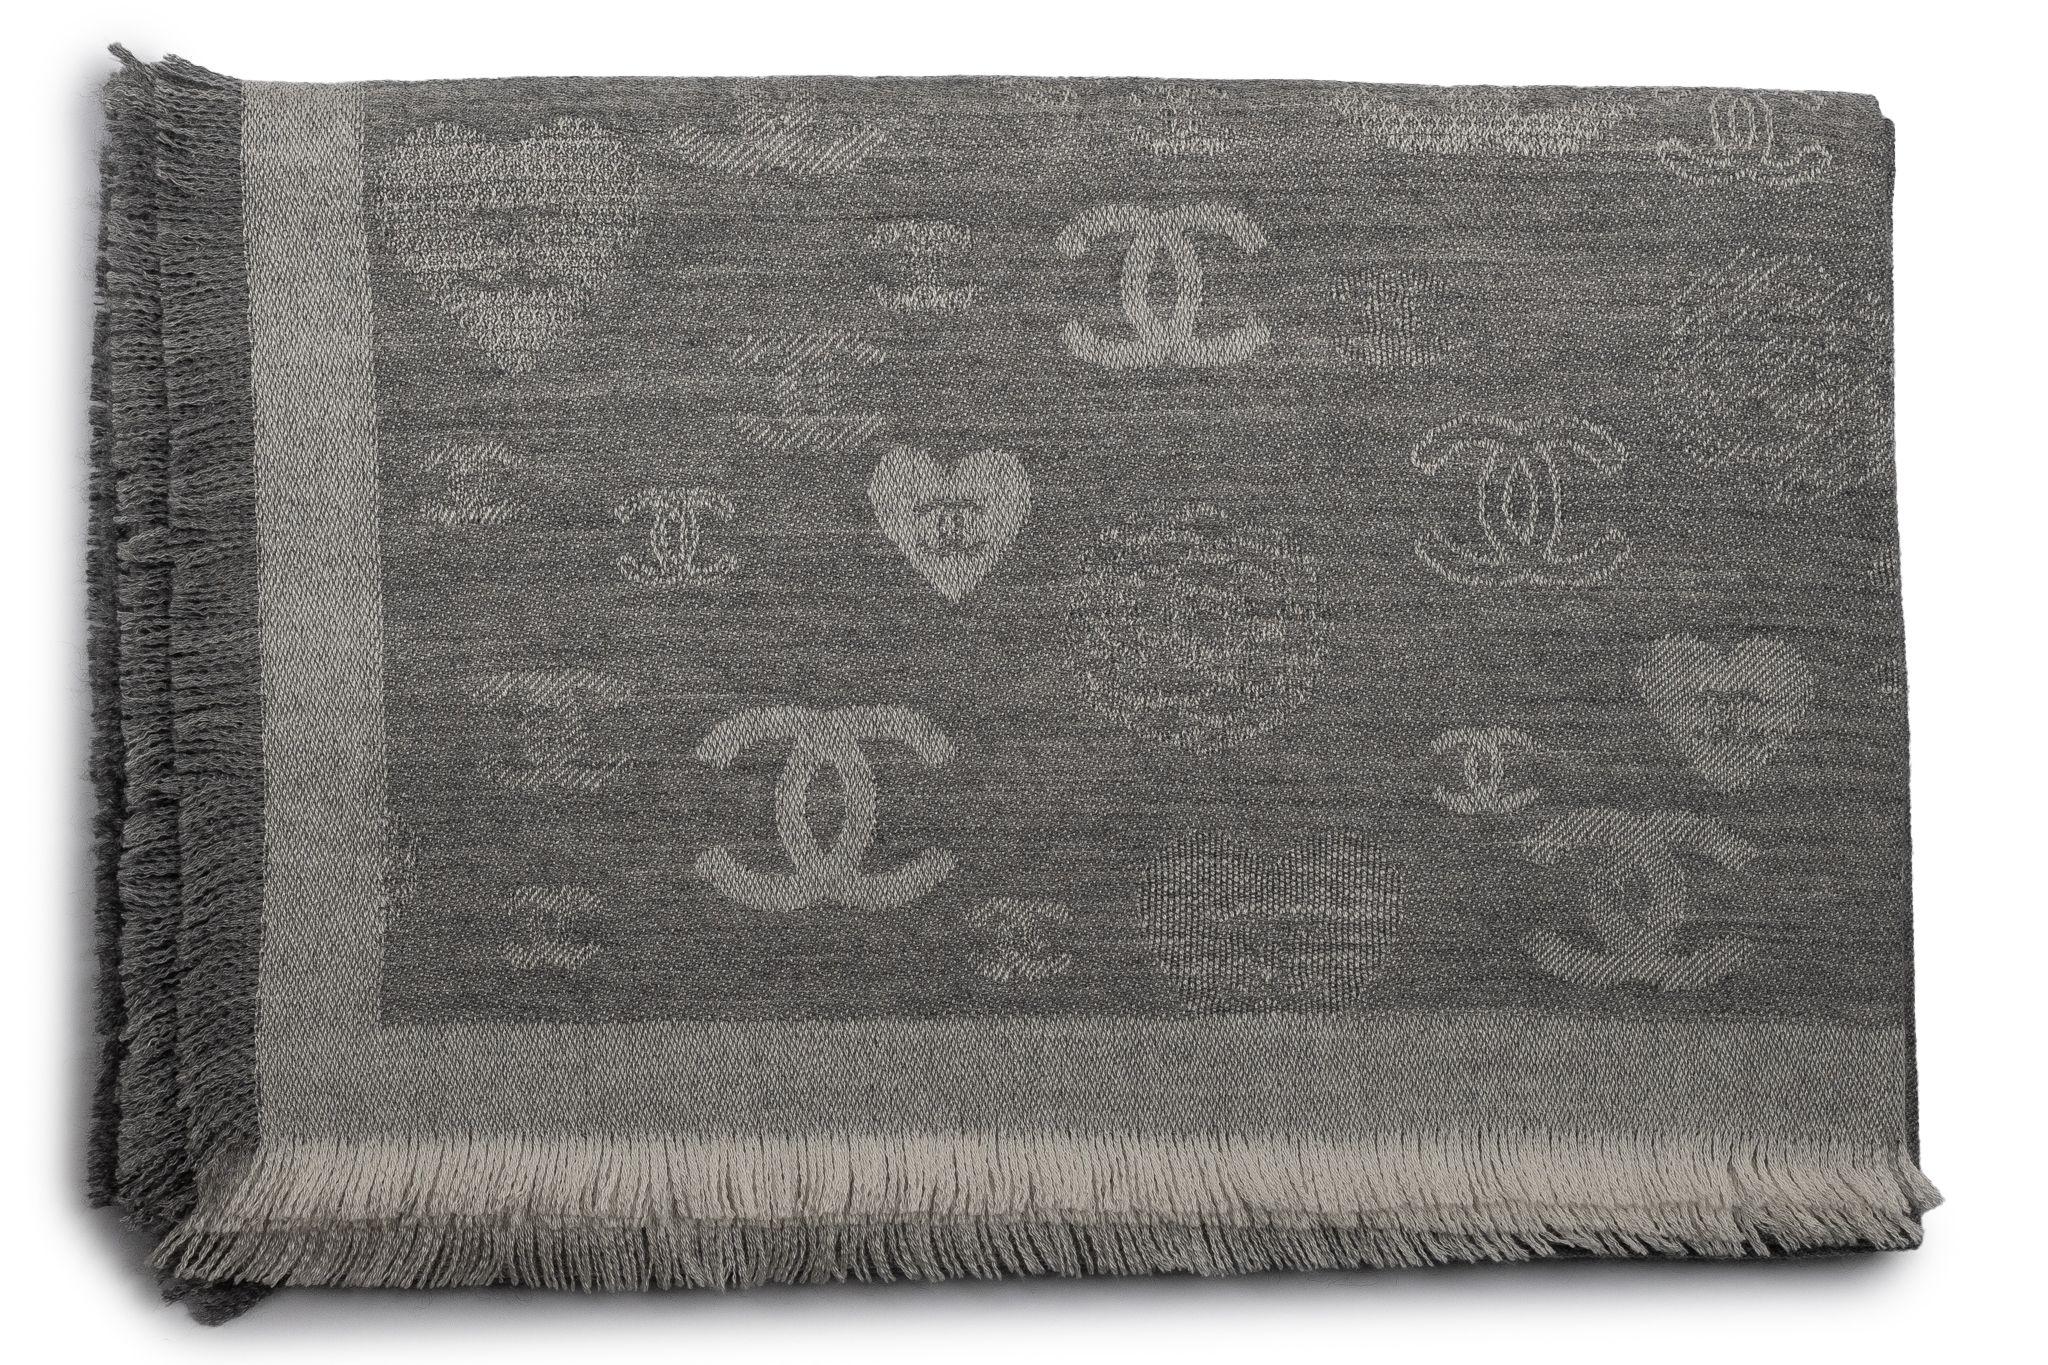 Chanel Cashmere Shawl in grey. The pattern features hearts and small CC logos. The item is in new condition.